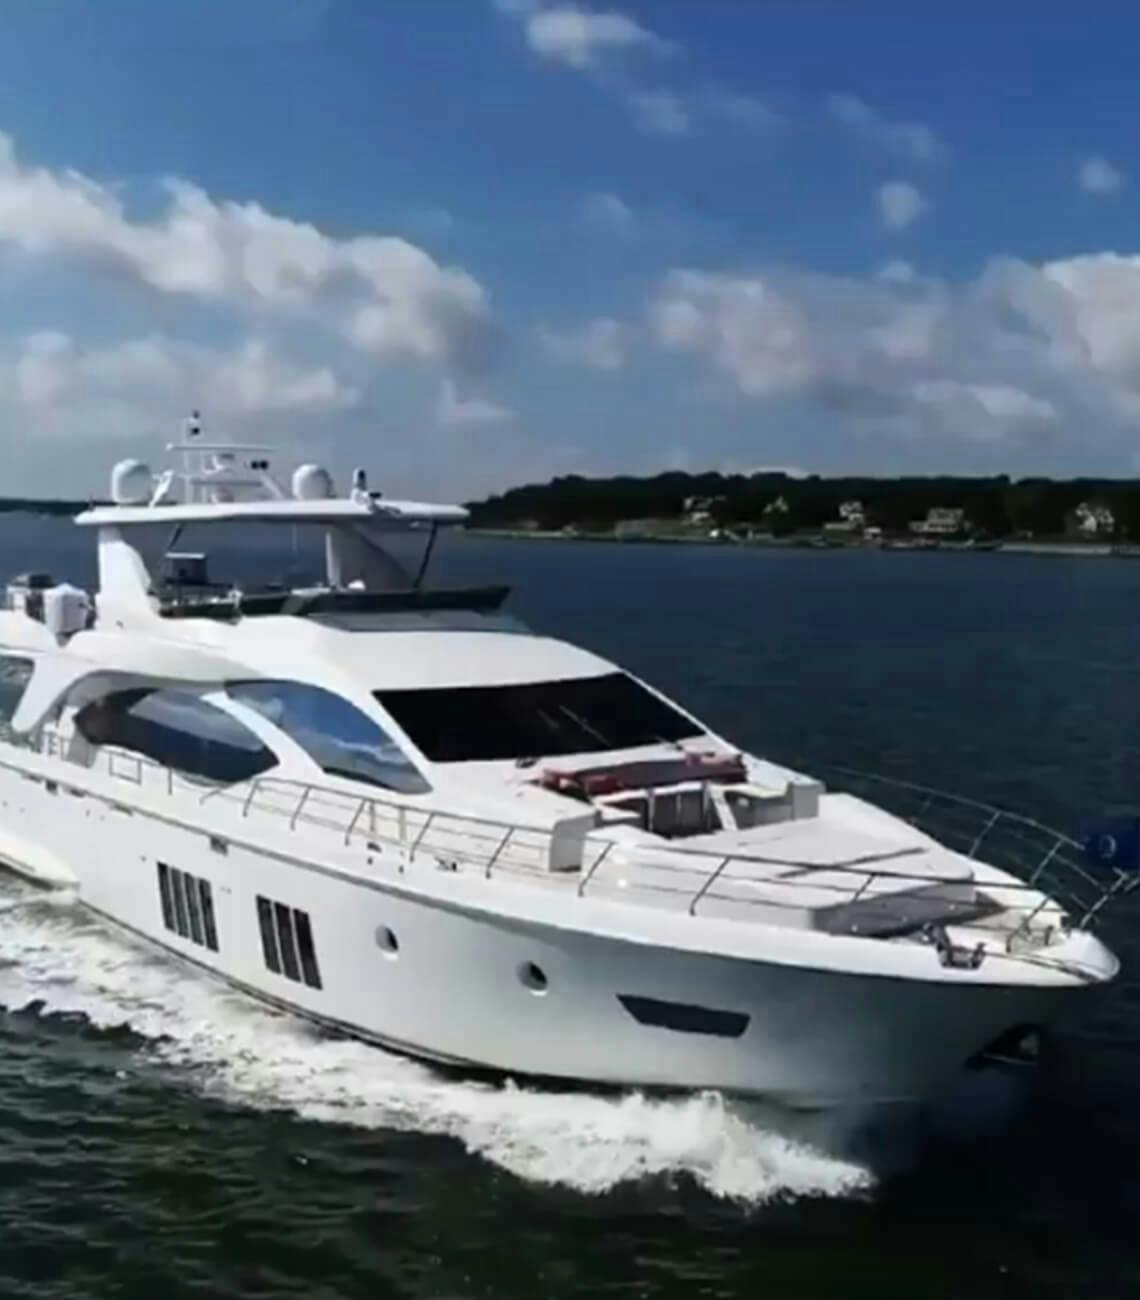 YachtLife connects customers with their dream boats, charters through their smartphones